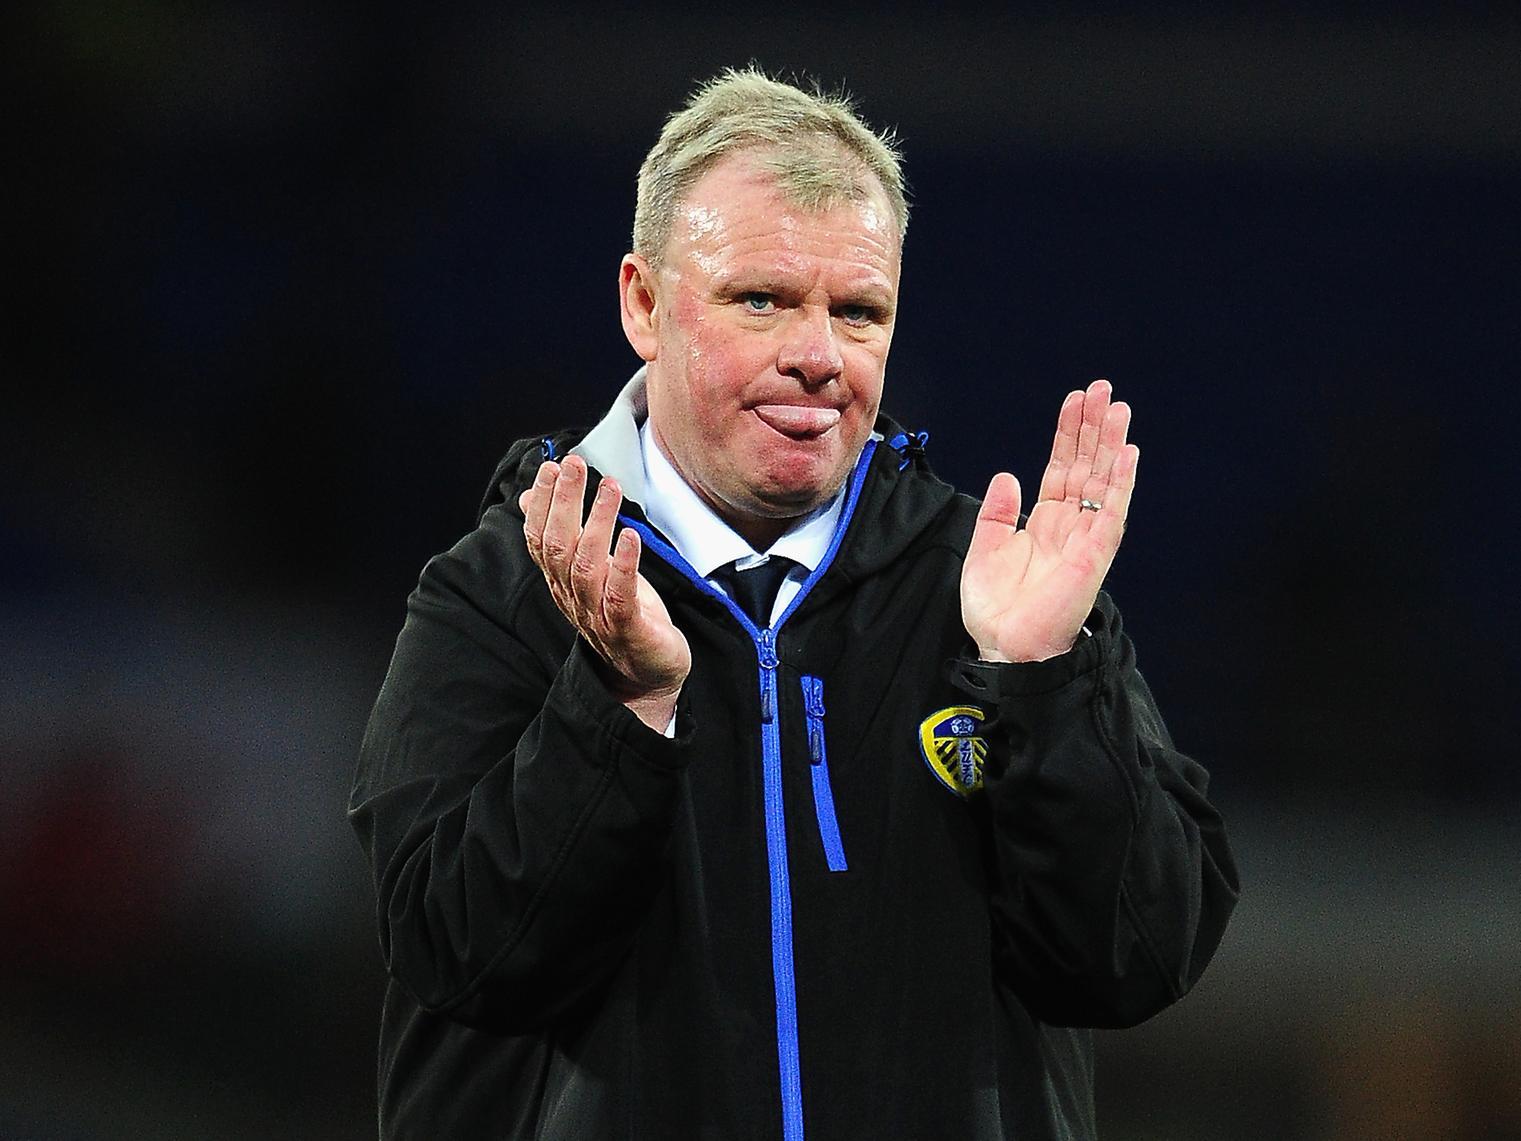 To be fair to Evans, his seven month tenure was a mammoth stint by Cellino's standards. The Scot has had spells at Mansfield Town and Peterborough United, and is currently in charge of Gillingham.